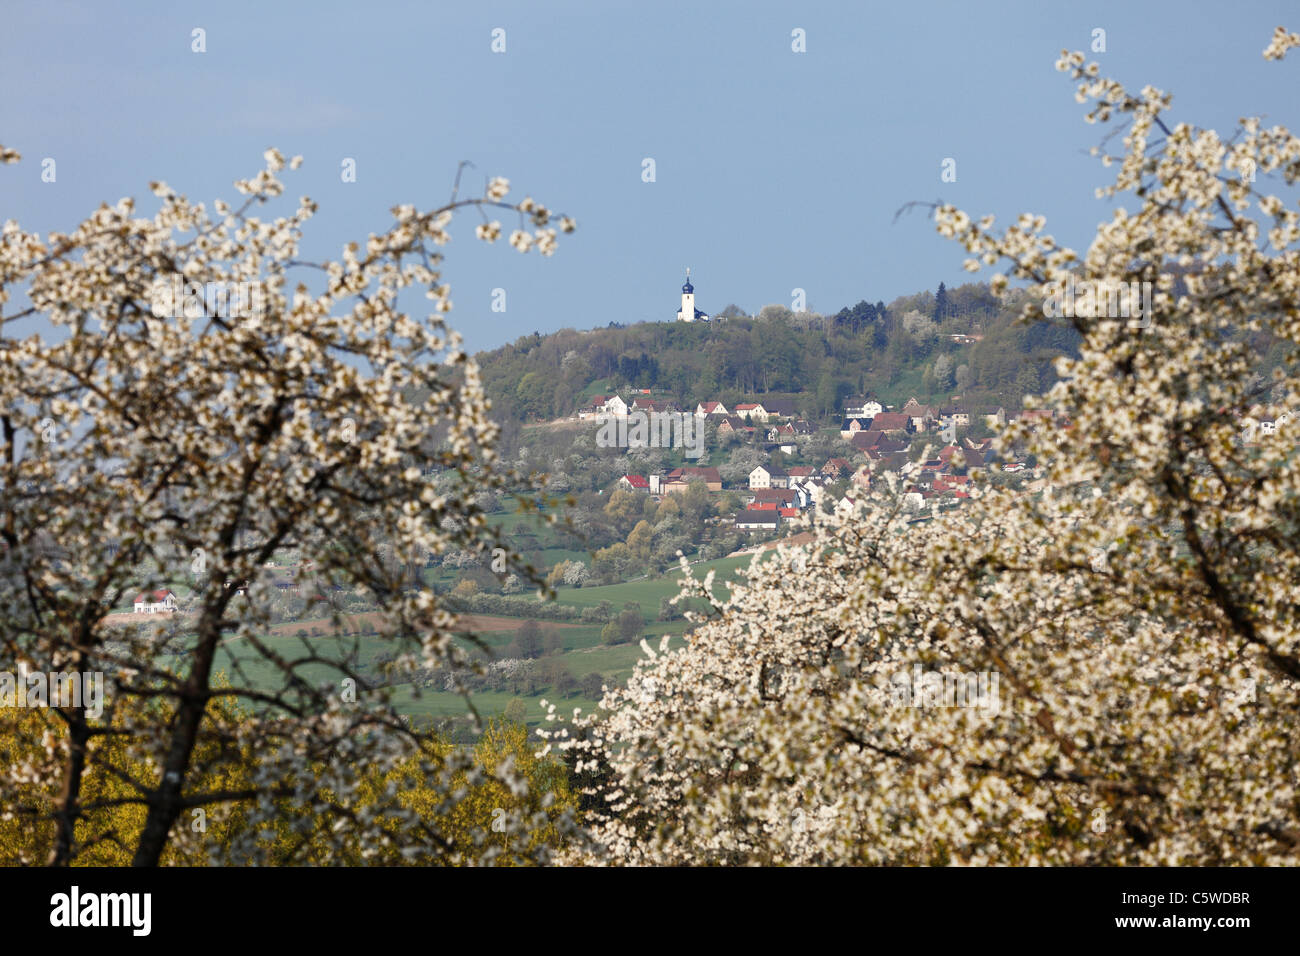 Germany, Bavaria, Franconia, Franconian Switzerland, Reifenberg, Chapel on top of town with cherry blossoms in foreground Stock Photo